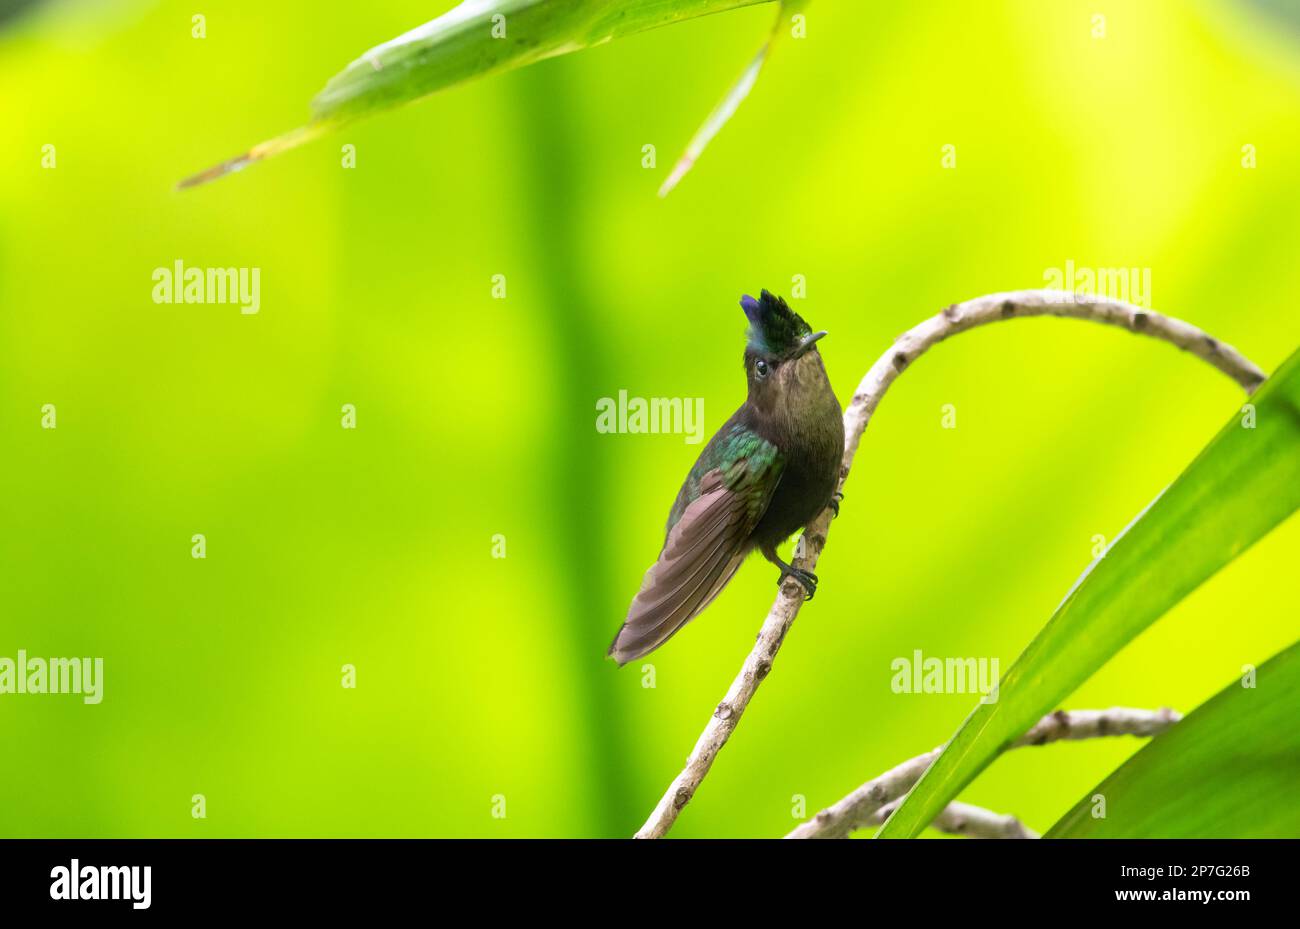 Small Antillean Crested hummingbird, Orthorhyncus cristatus, perched on a branch in the forest with green background. Stock Photo